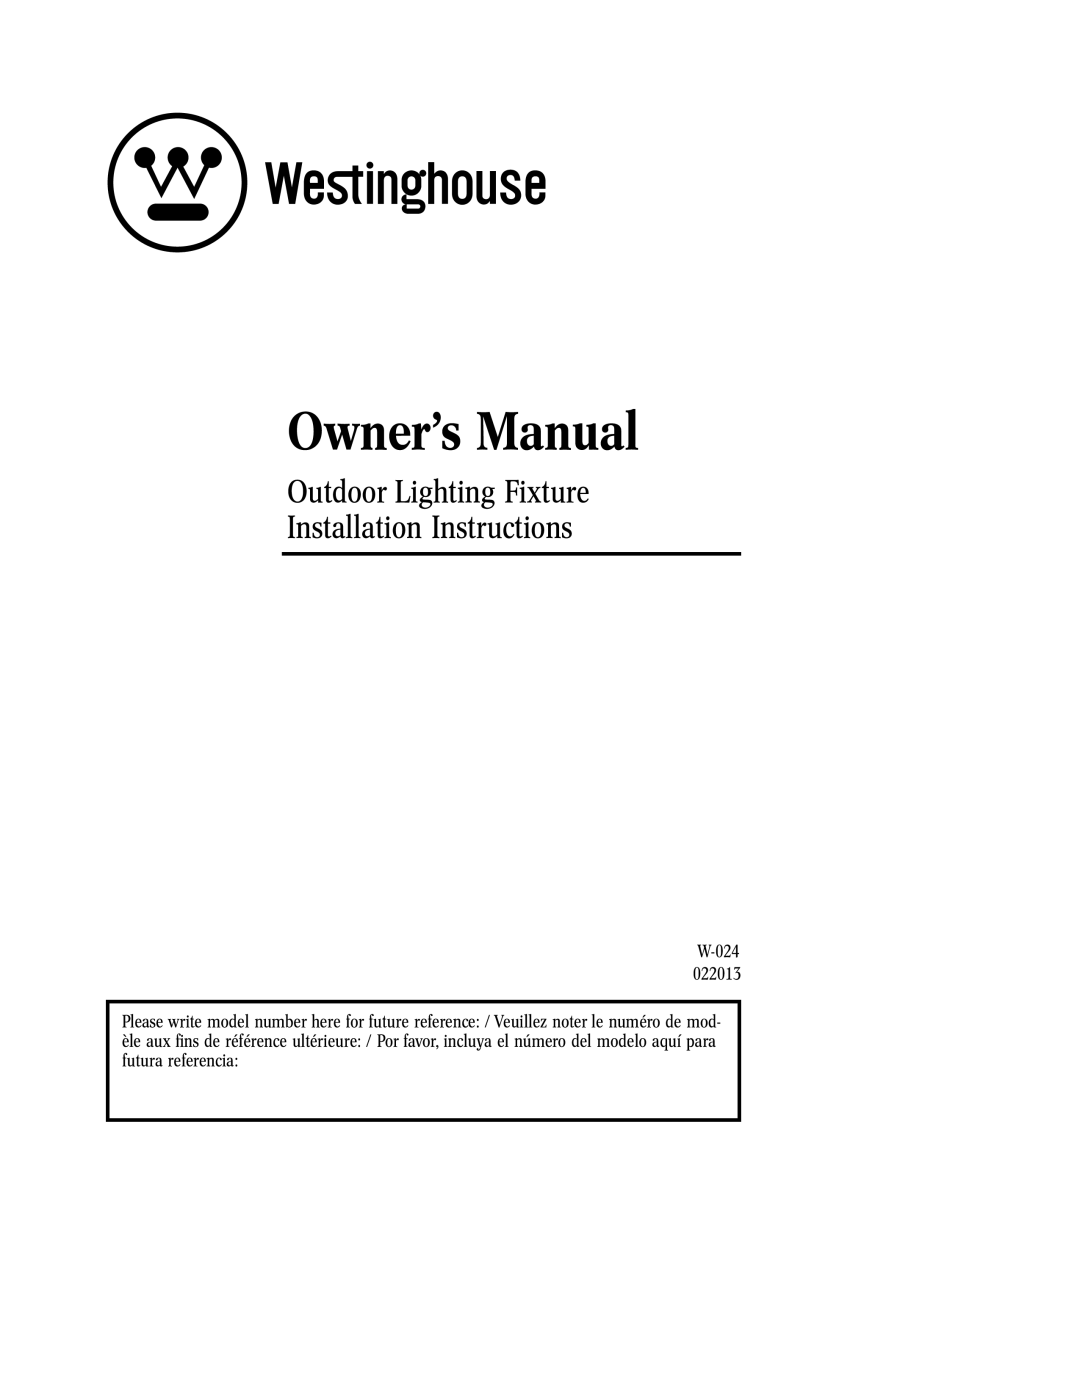 Westinghouse W-024 owner manual Outdoor Lighting Fixture, Installation Instructions 